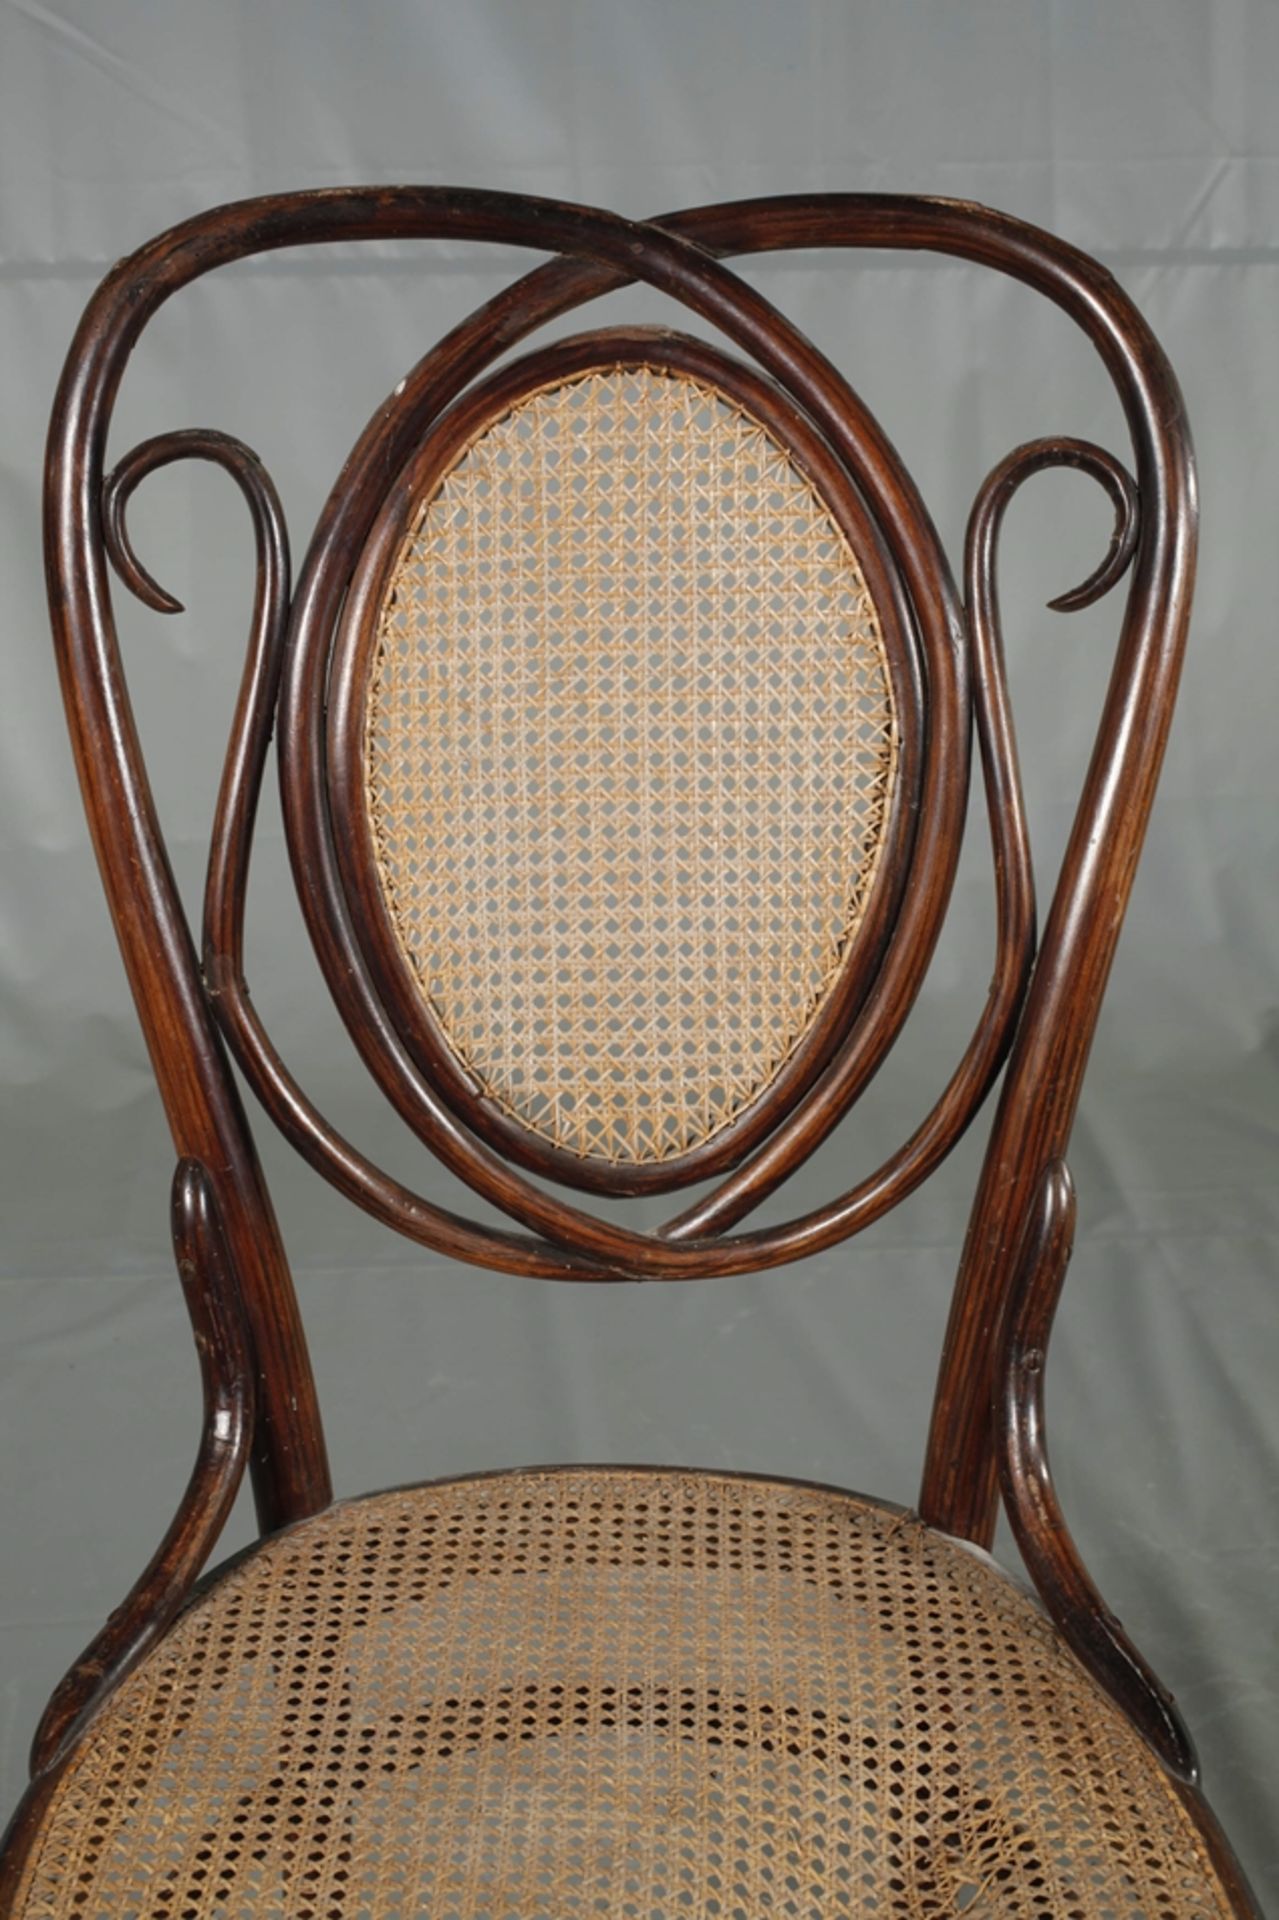 Early Thonet chair, model no. 22 - Image 2 of 6